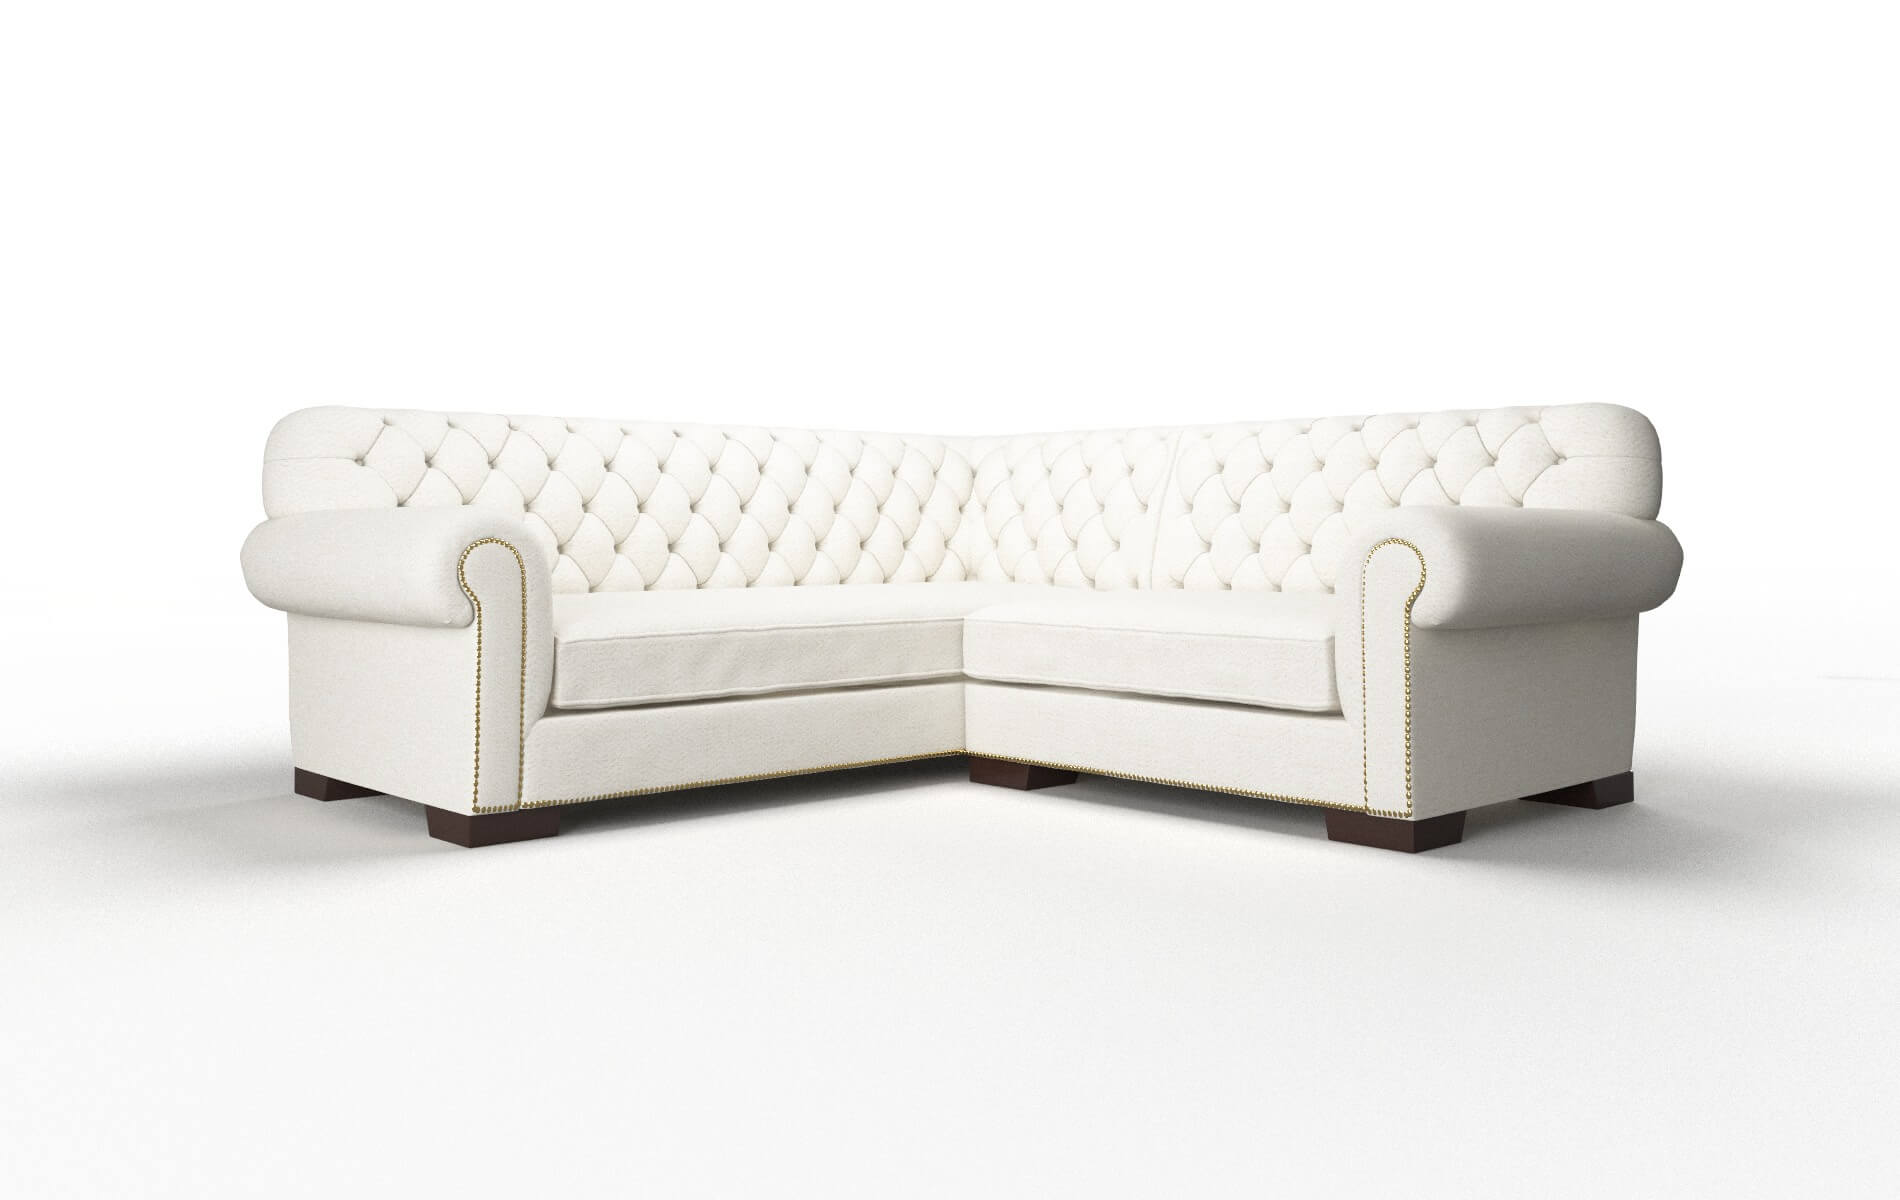 Chester Catalina Ivory Sectional espresso legs